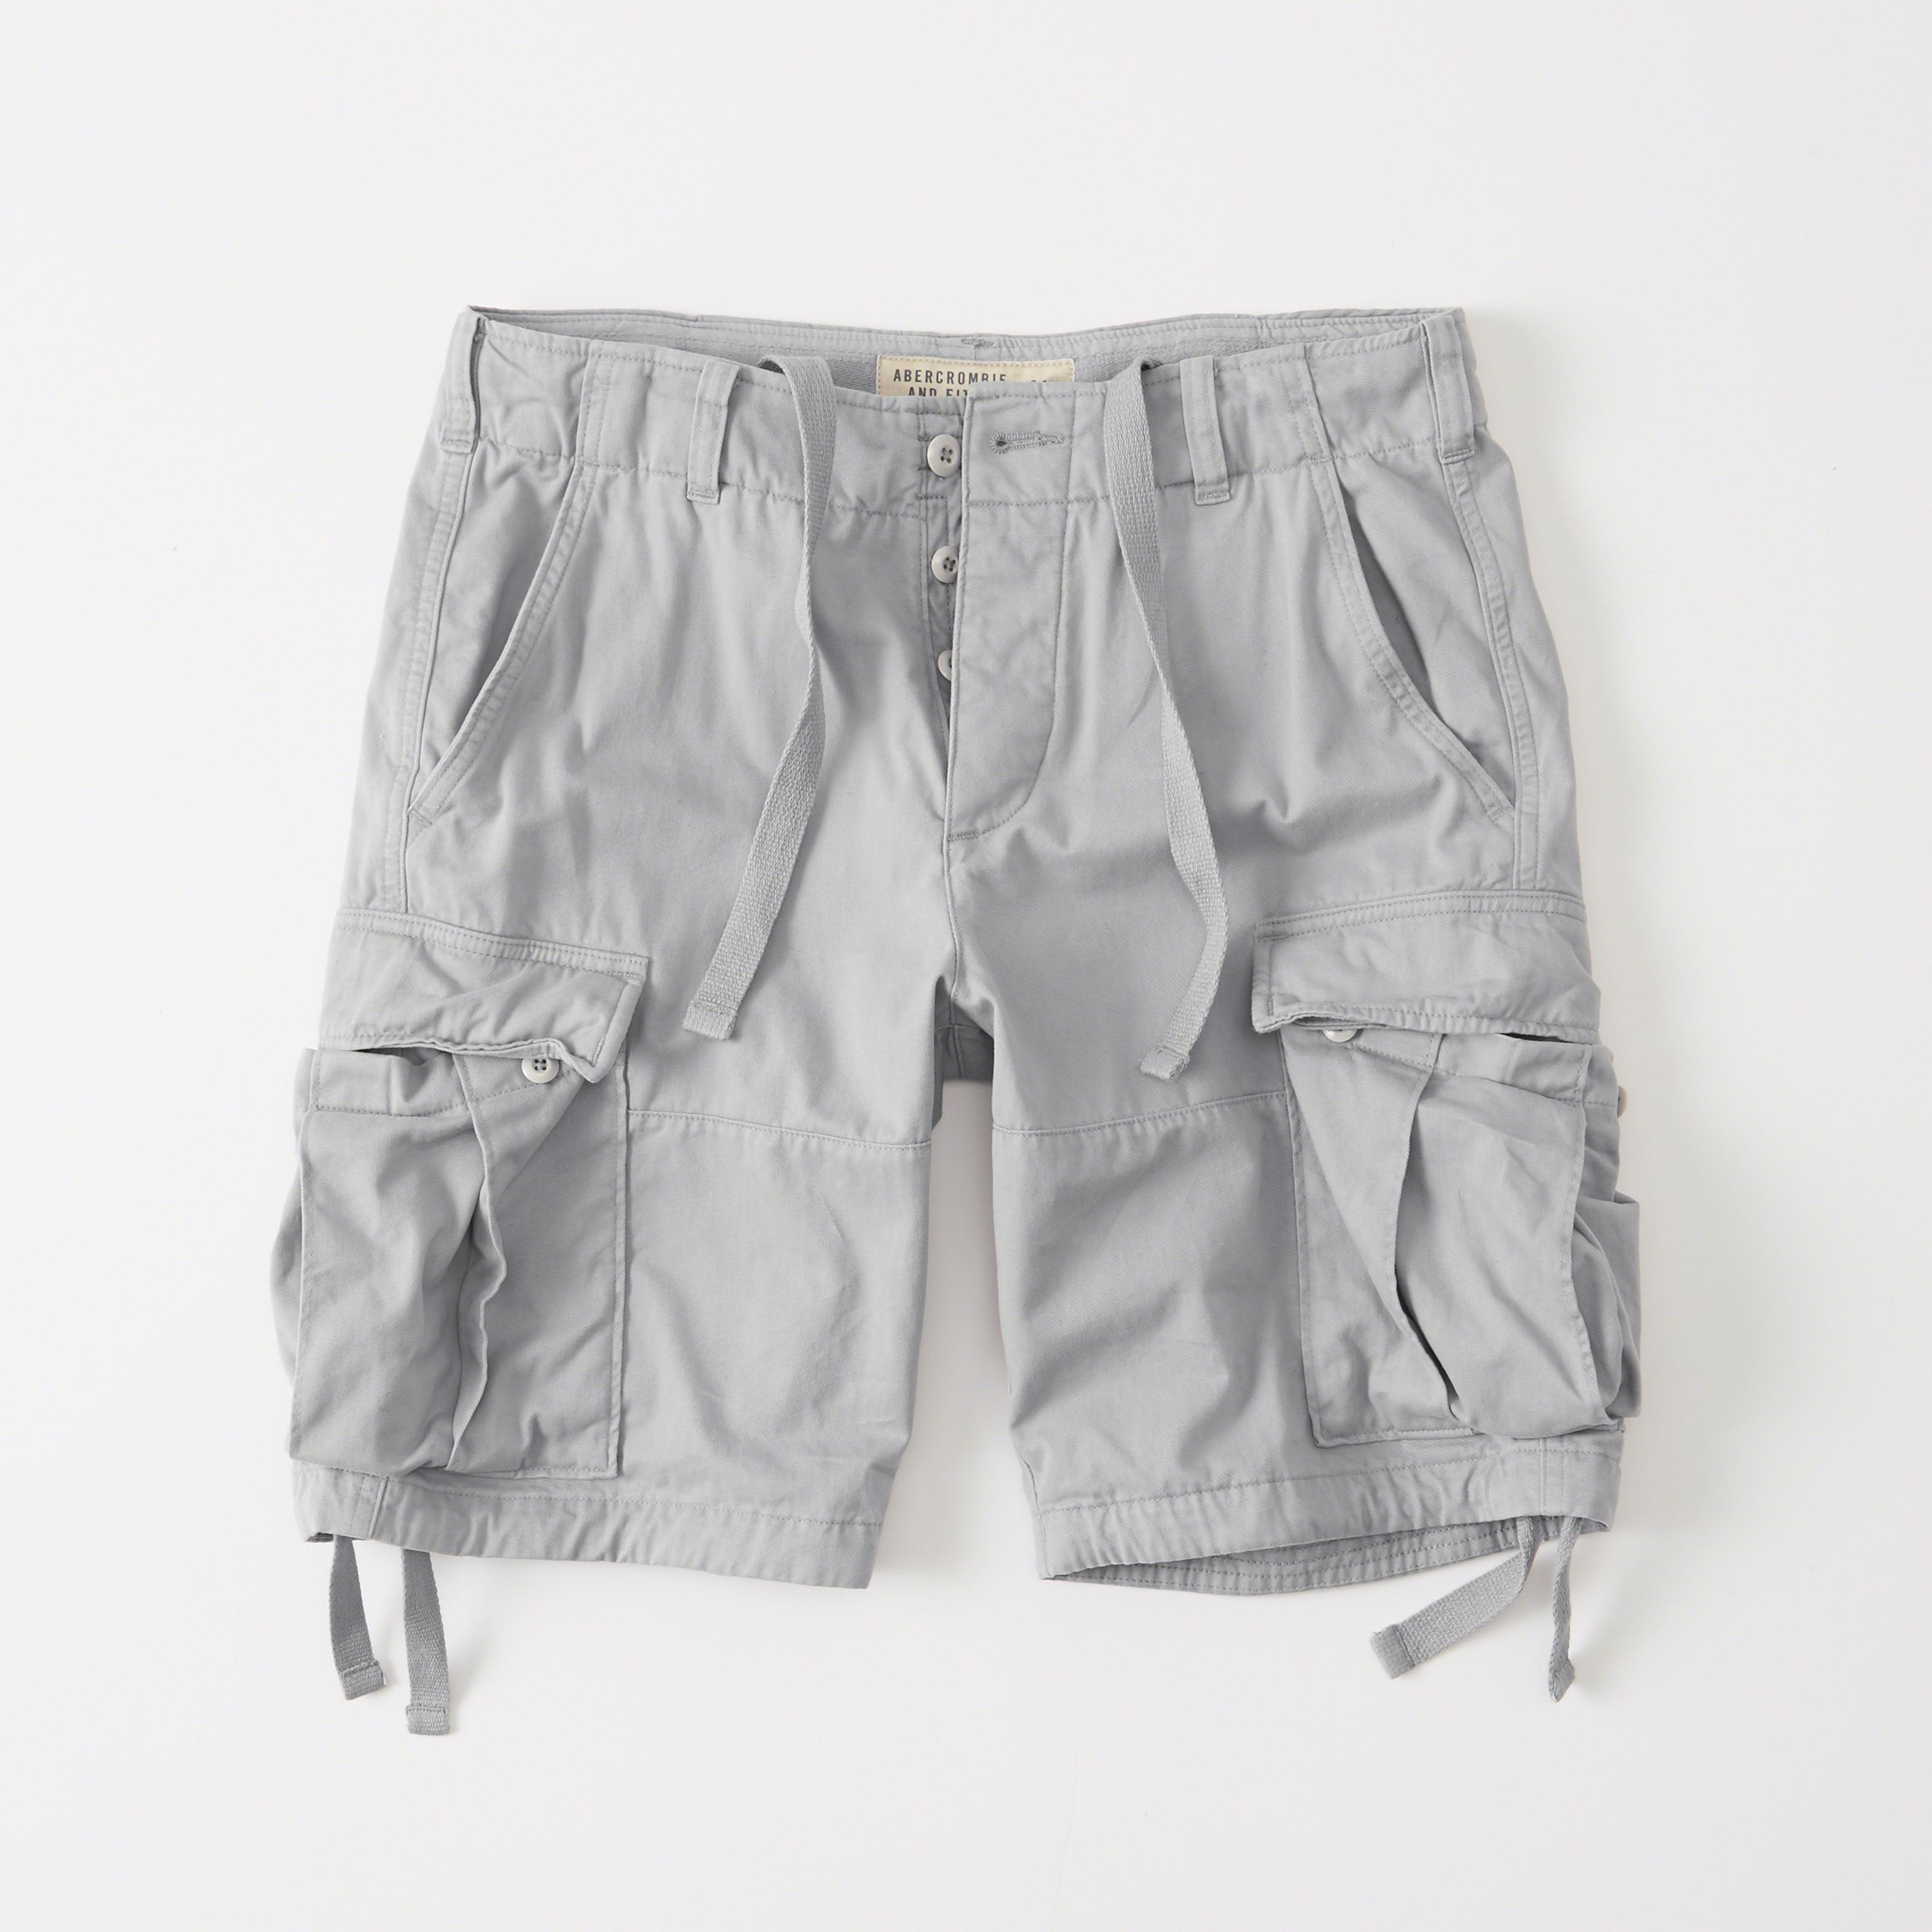 Lyst - Abercrombie & Fitch Cargo Shorts in Gray for Men